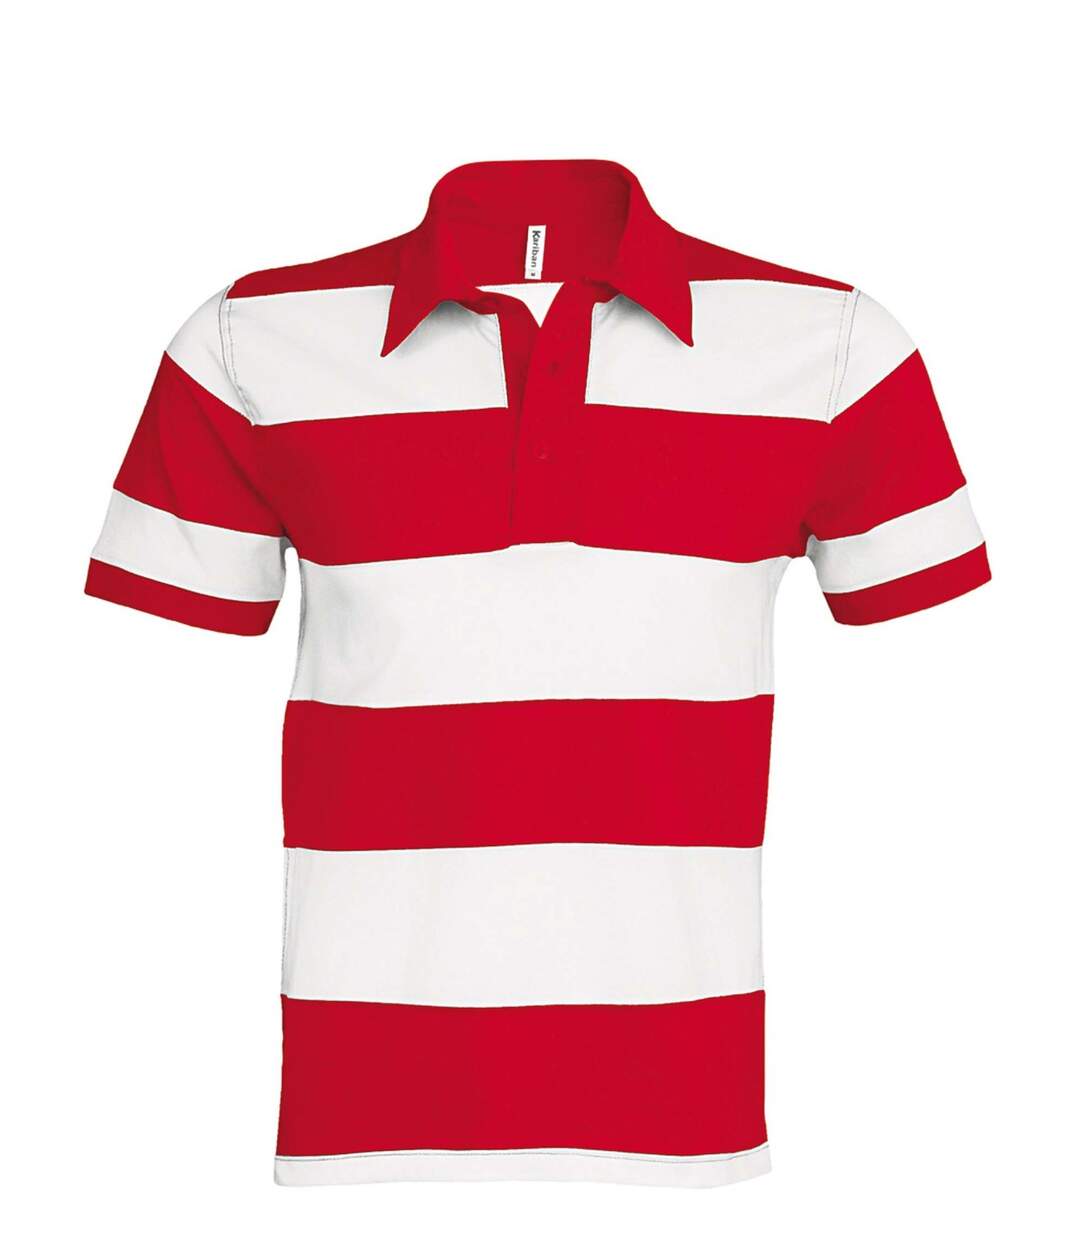 Polo homme rugby - K237 rayé rouge et blanc - manches courtes